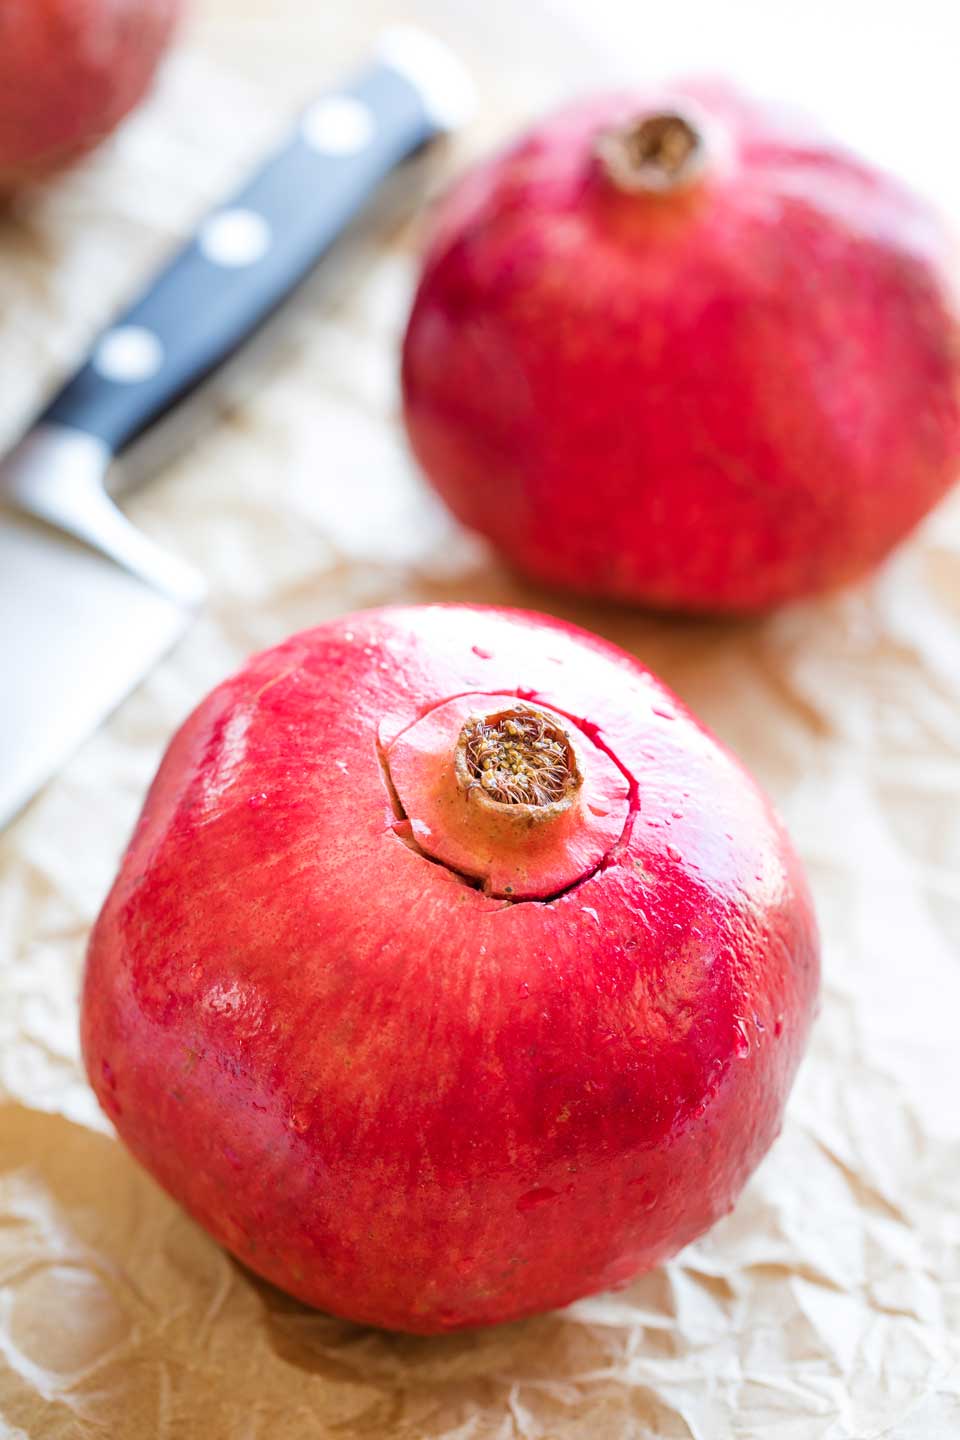 Showing how to cut a pomegranate, beginning by cutting around the blossom end with a sharp knife.